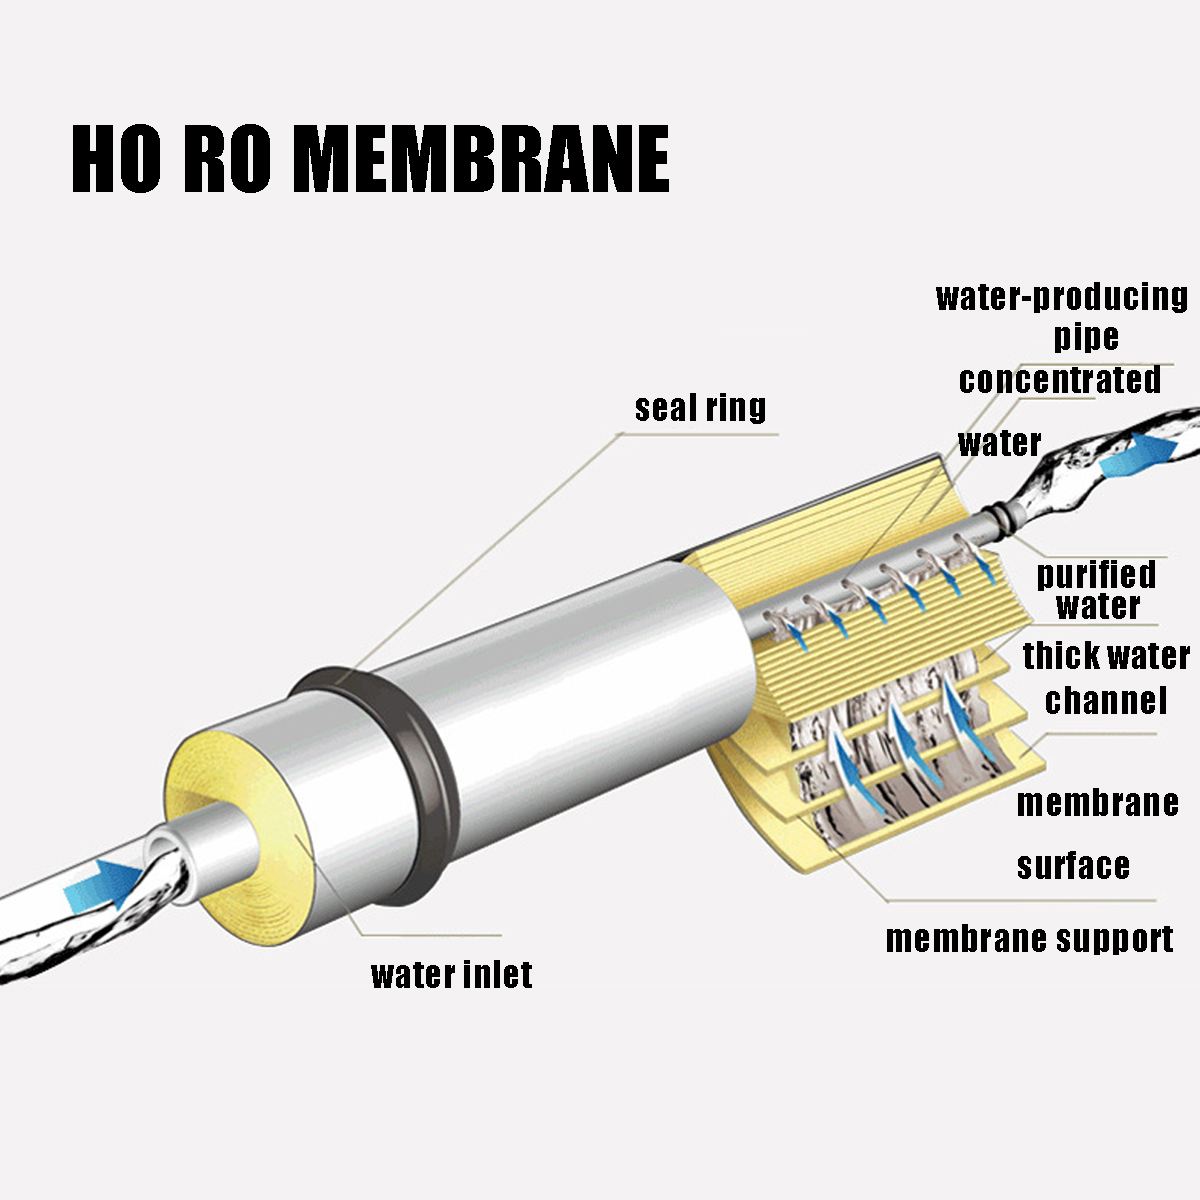 50/75/100/300/400G RO Membrane Replacement Water Filter Purifier Reverse Osmosis System Home Kitchen Drinking Water Treatment